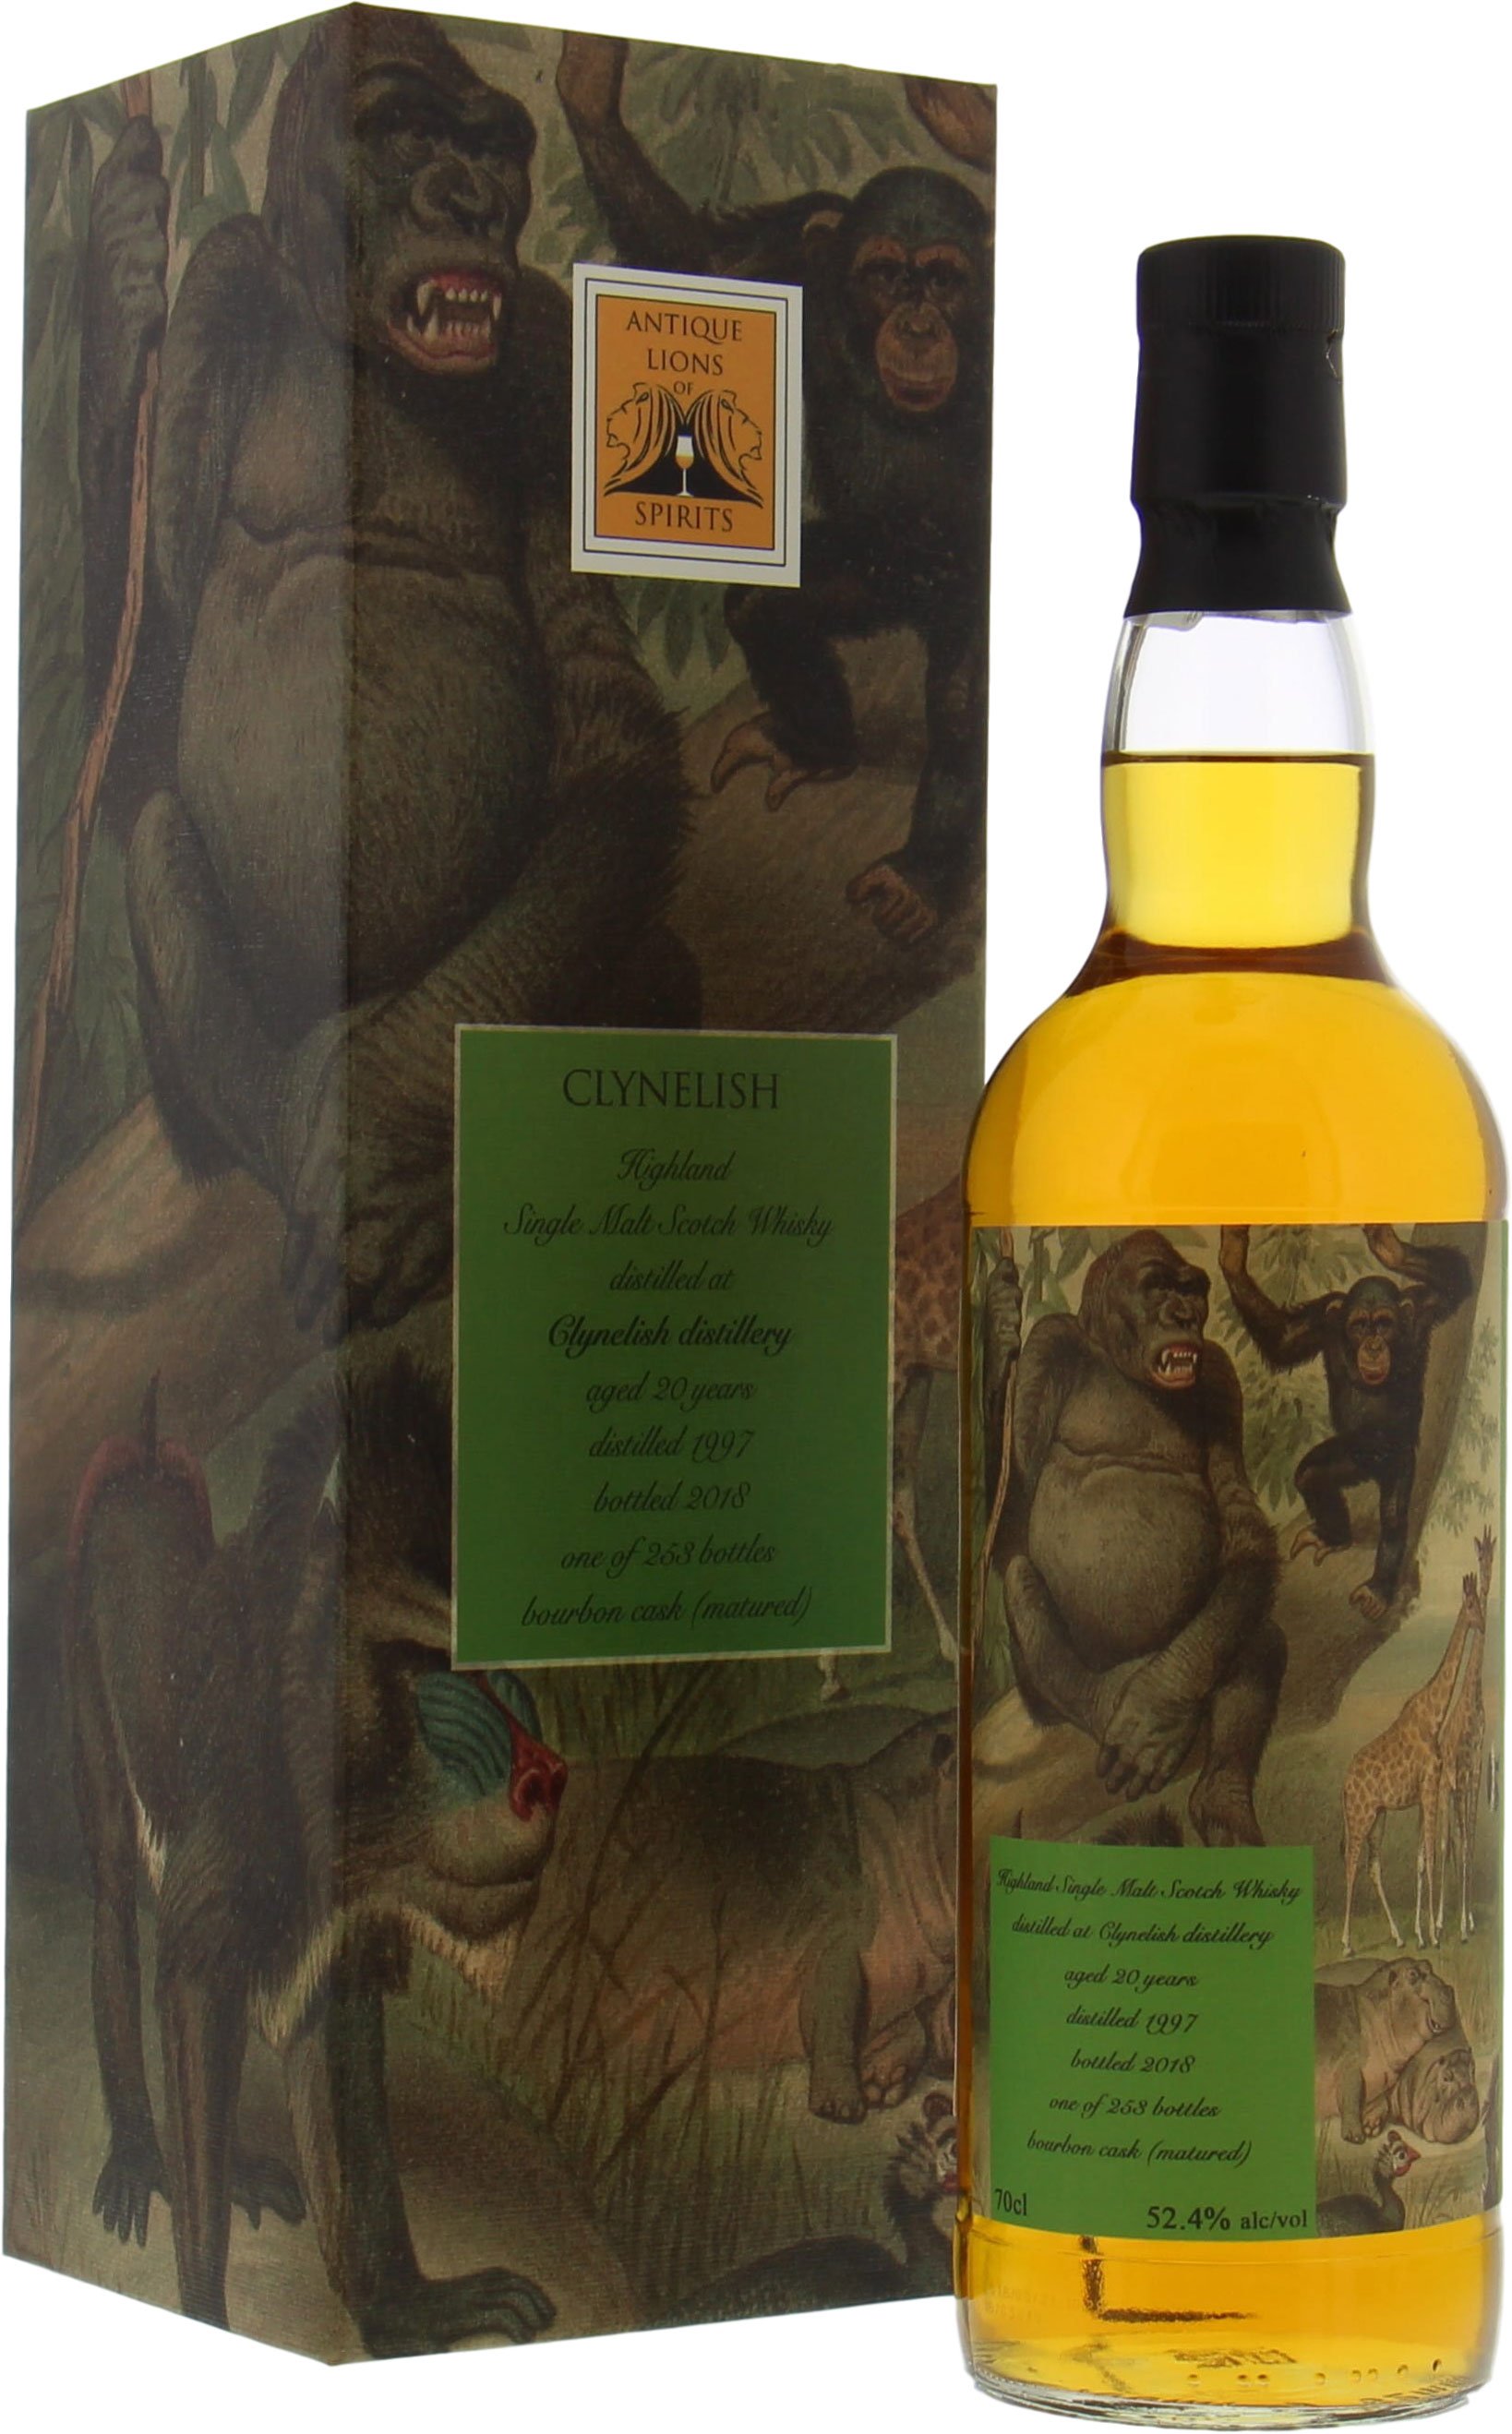 Clynelish - 21 Years Old Antique Lions of Spirits Savannah Series 52.4% 1997 In Original Container